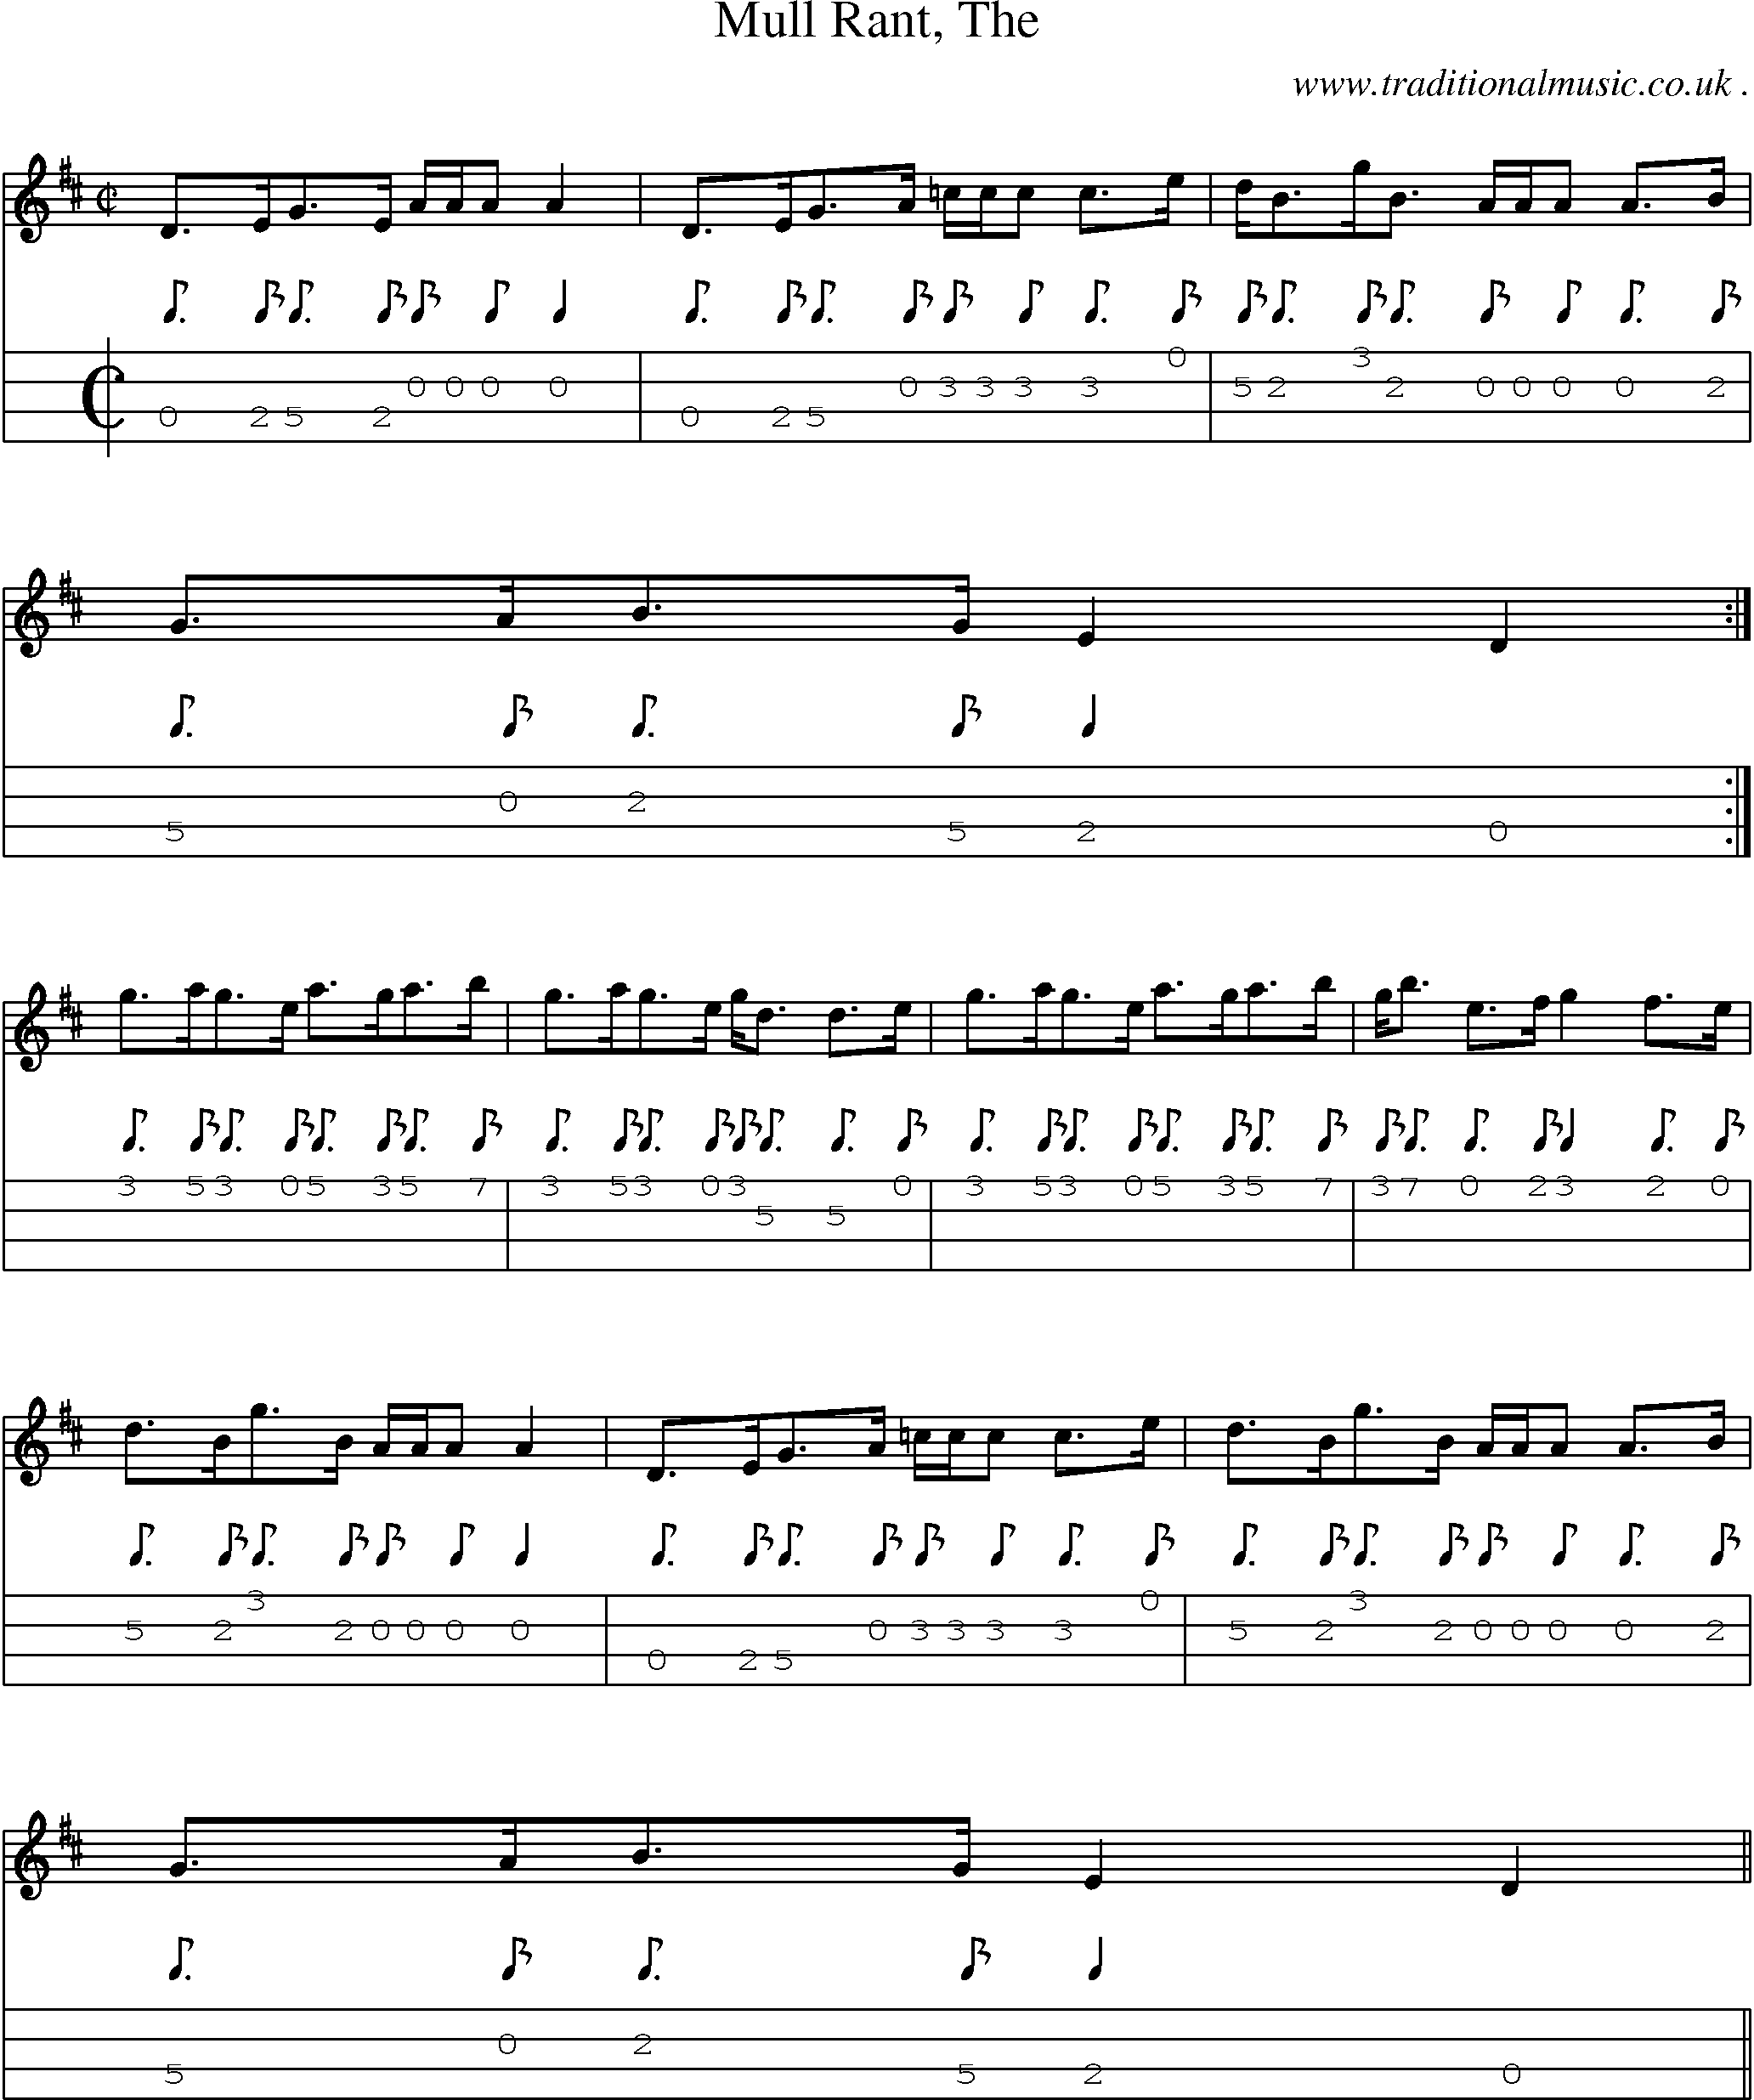 Sheet-music  score, Chords and Mandolin Tabs for Mull Rant The